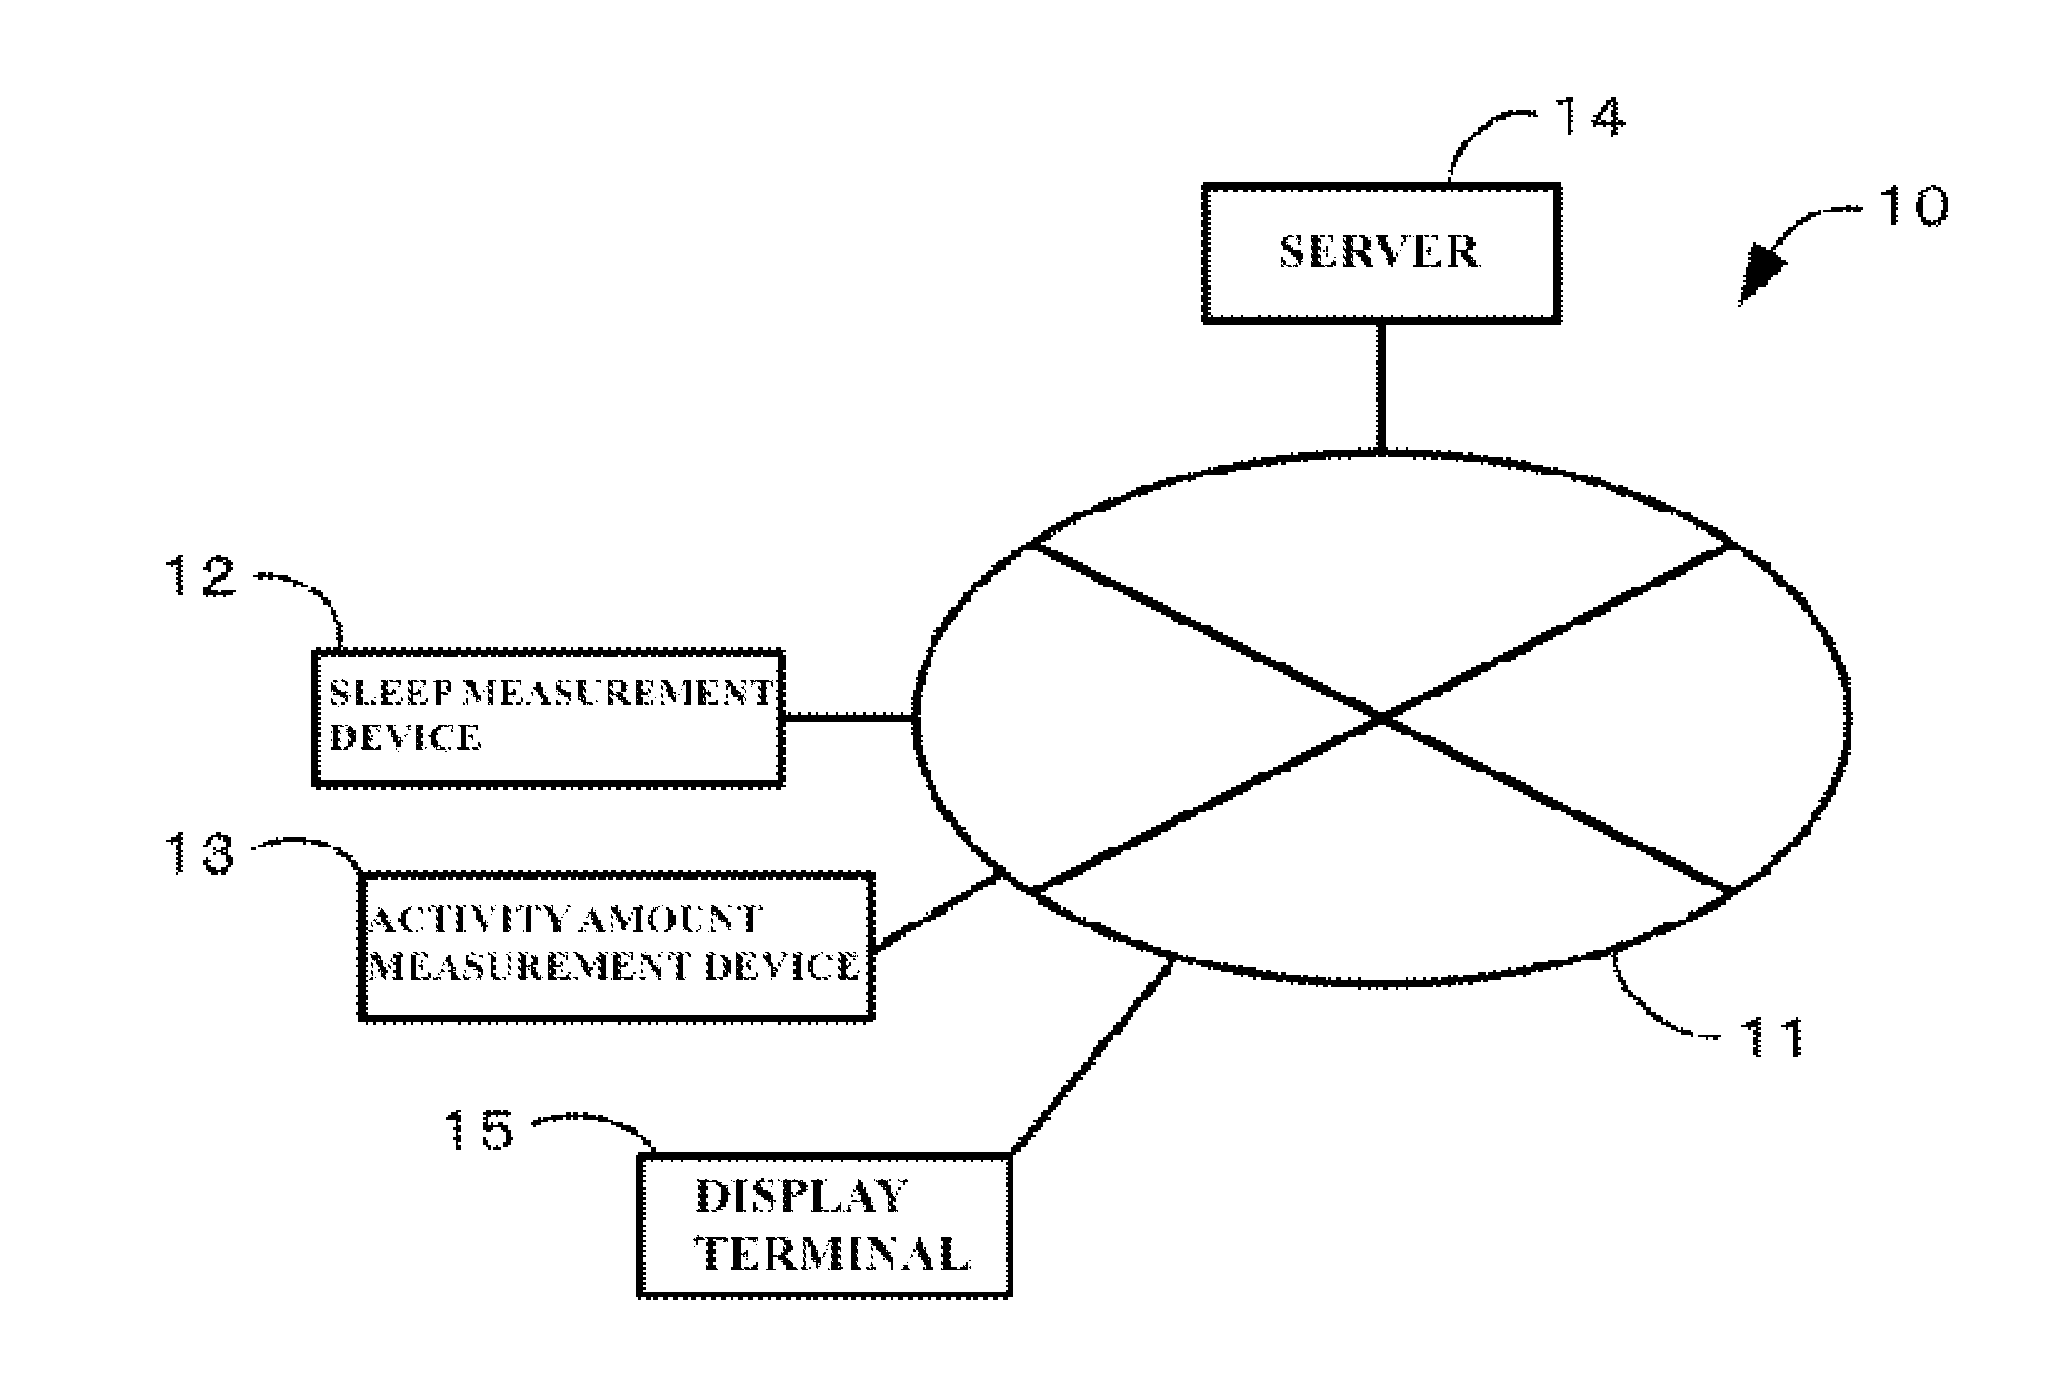 Sleep and activity amount display program, device, system, and method